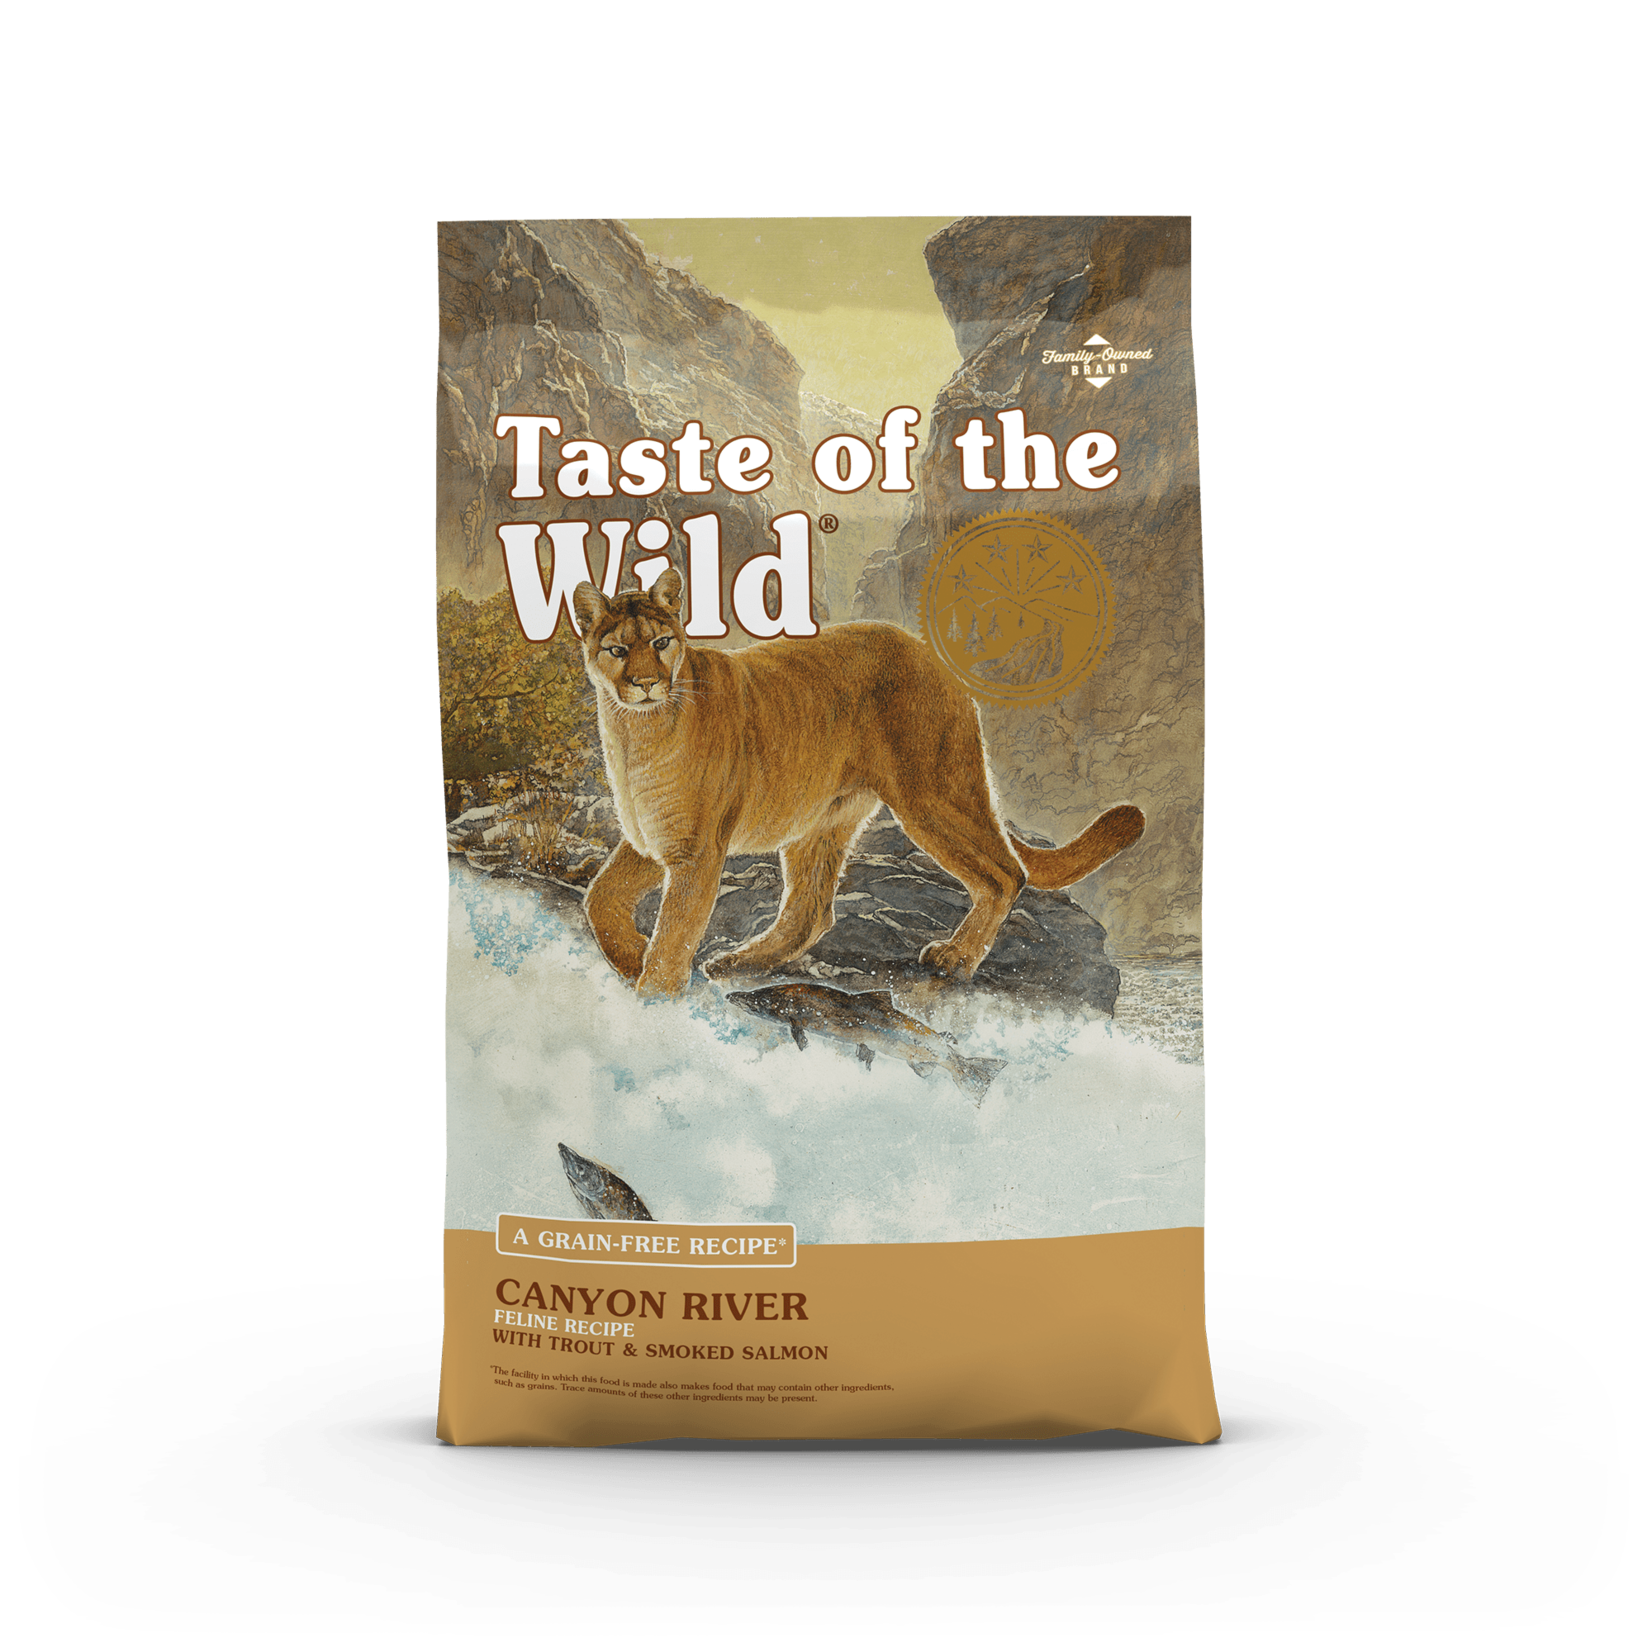 Taste of the Wild Taste of the Wild Dry Cat Food Canyon River Recipe with Trout & Smoked Salmon Grain Free